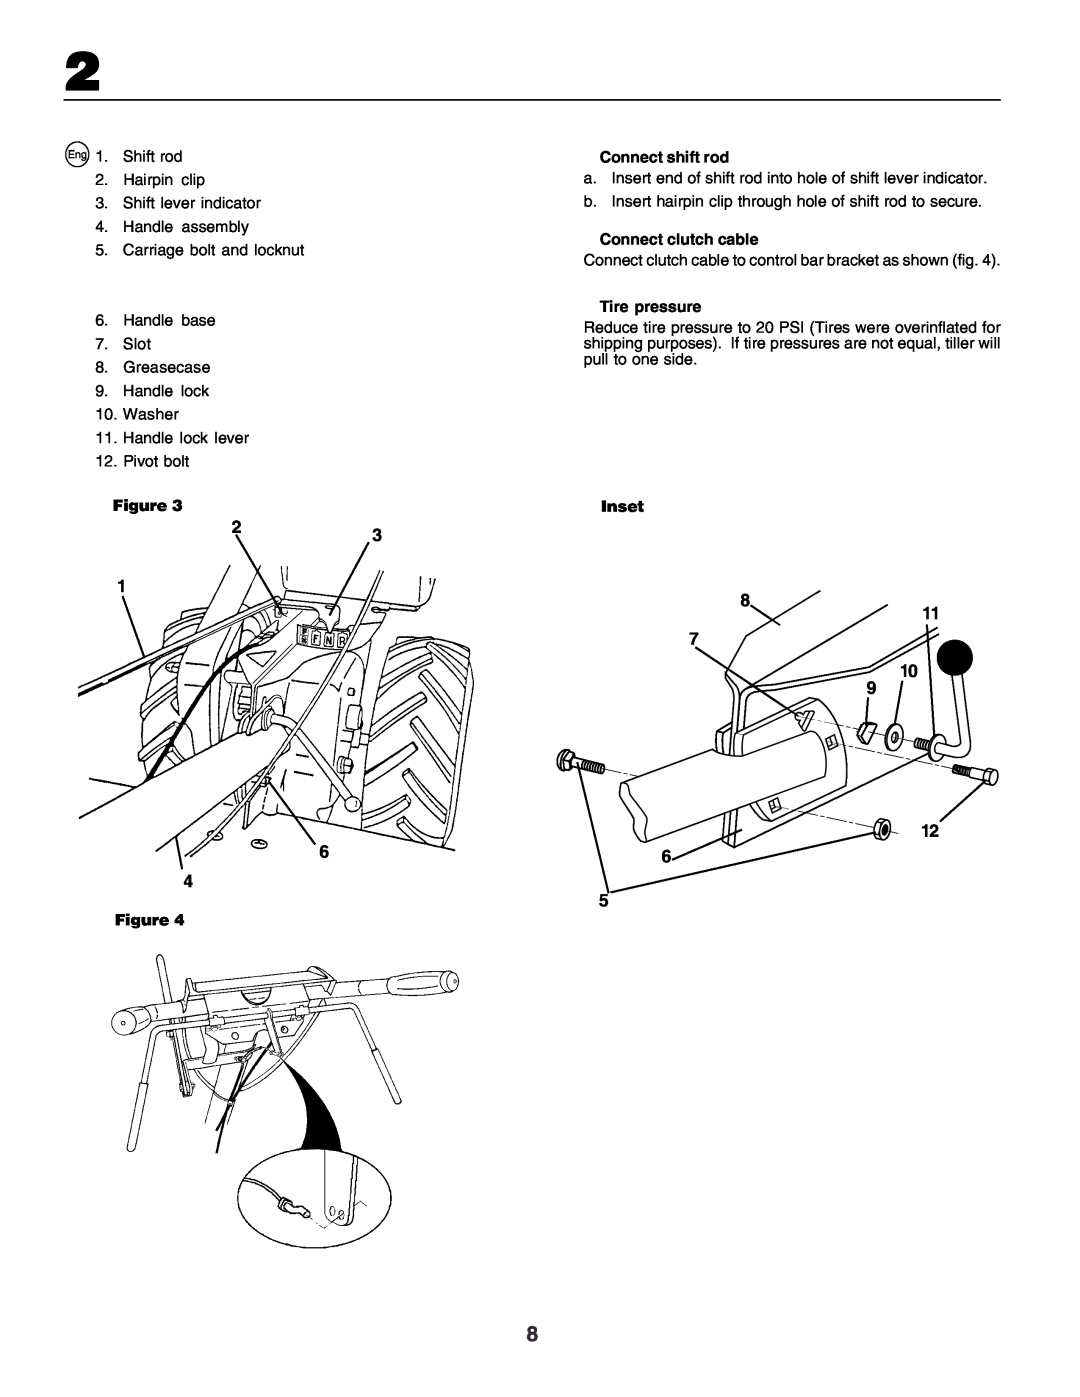 Husqvarna crt51 instruction manual Connect shift rod, Connect clutch cable, Tire pressure, Inset 